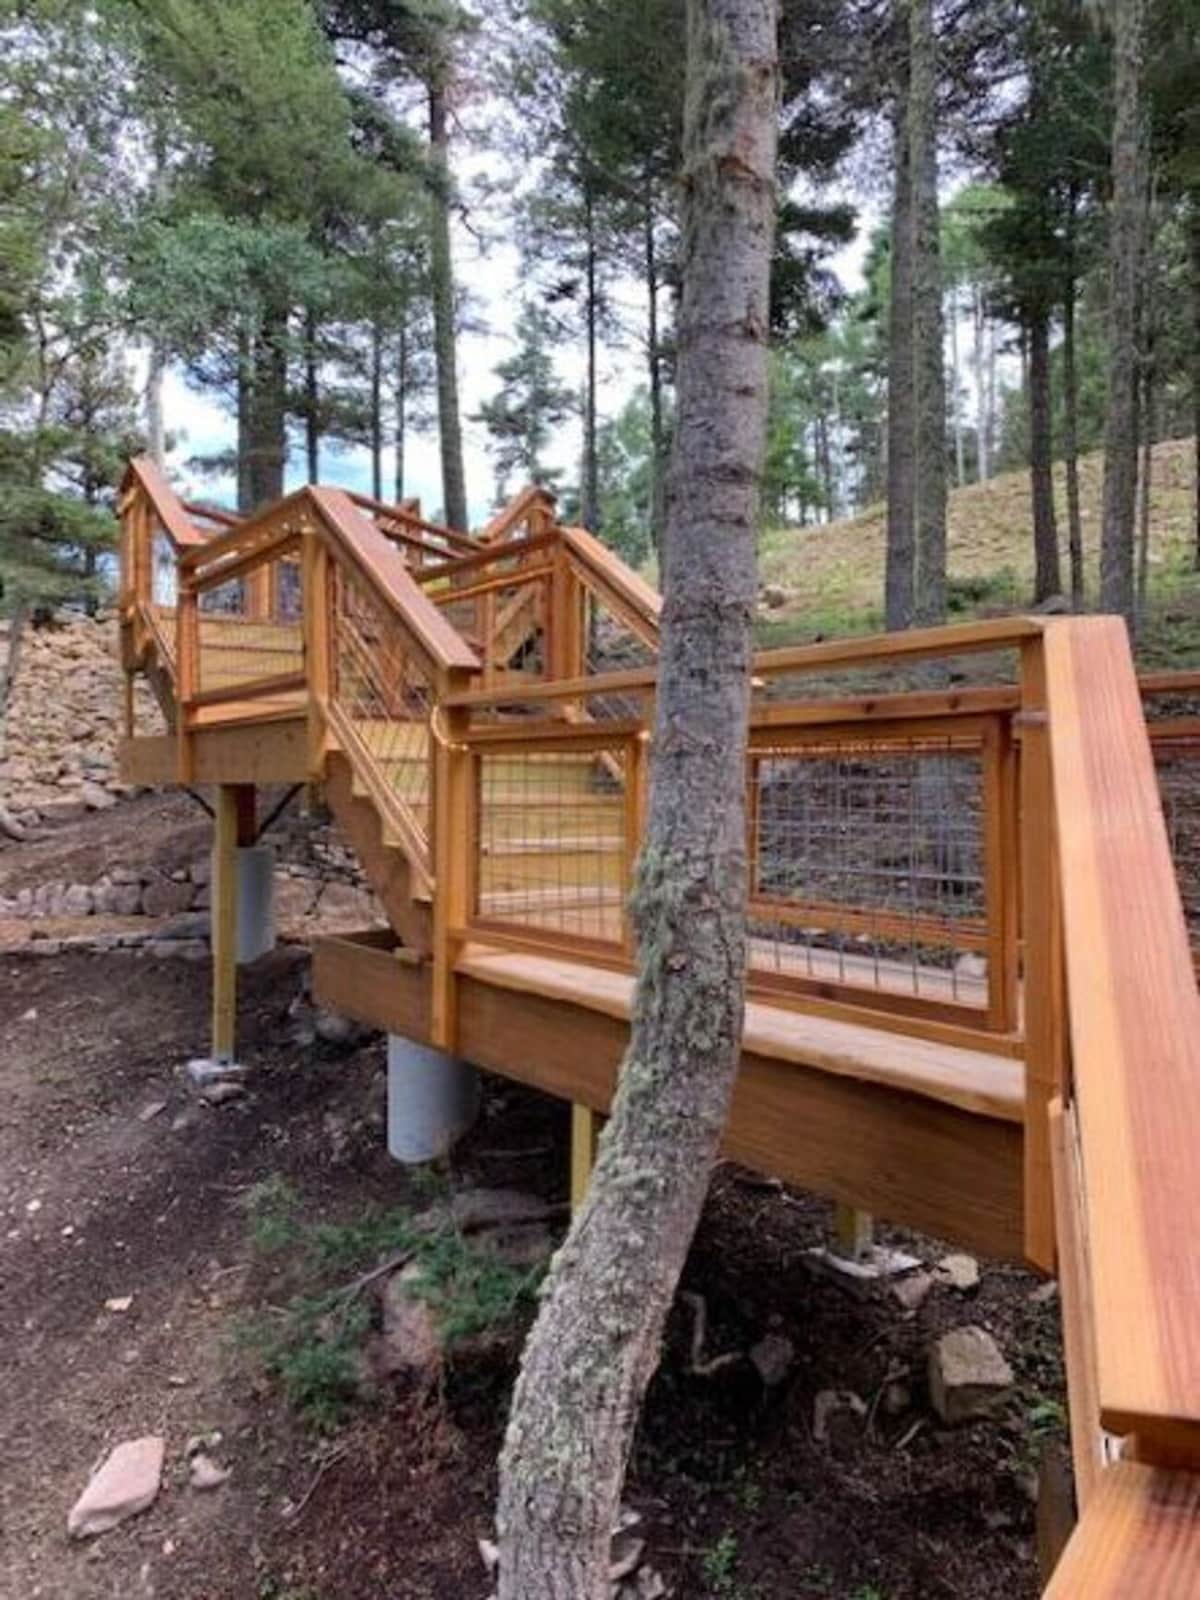 Luxurious Treehouse BnB vacation rental at 9200'